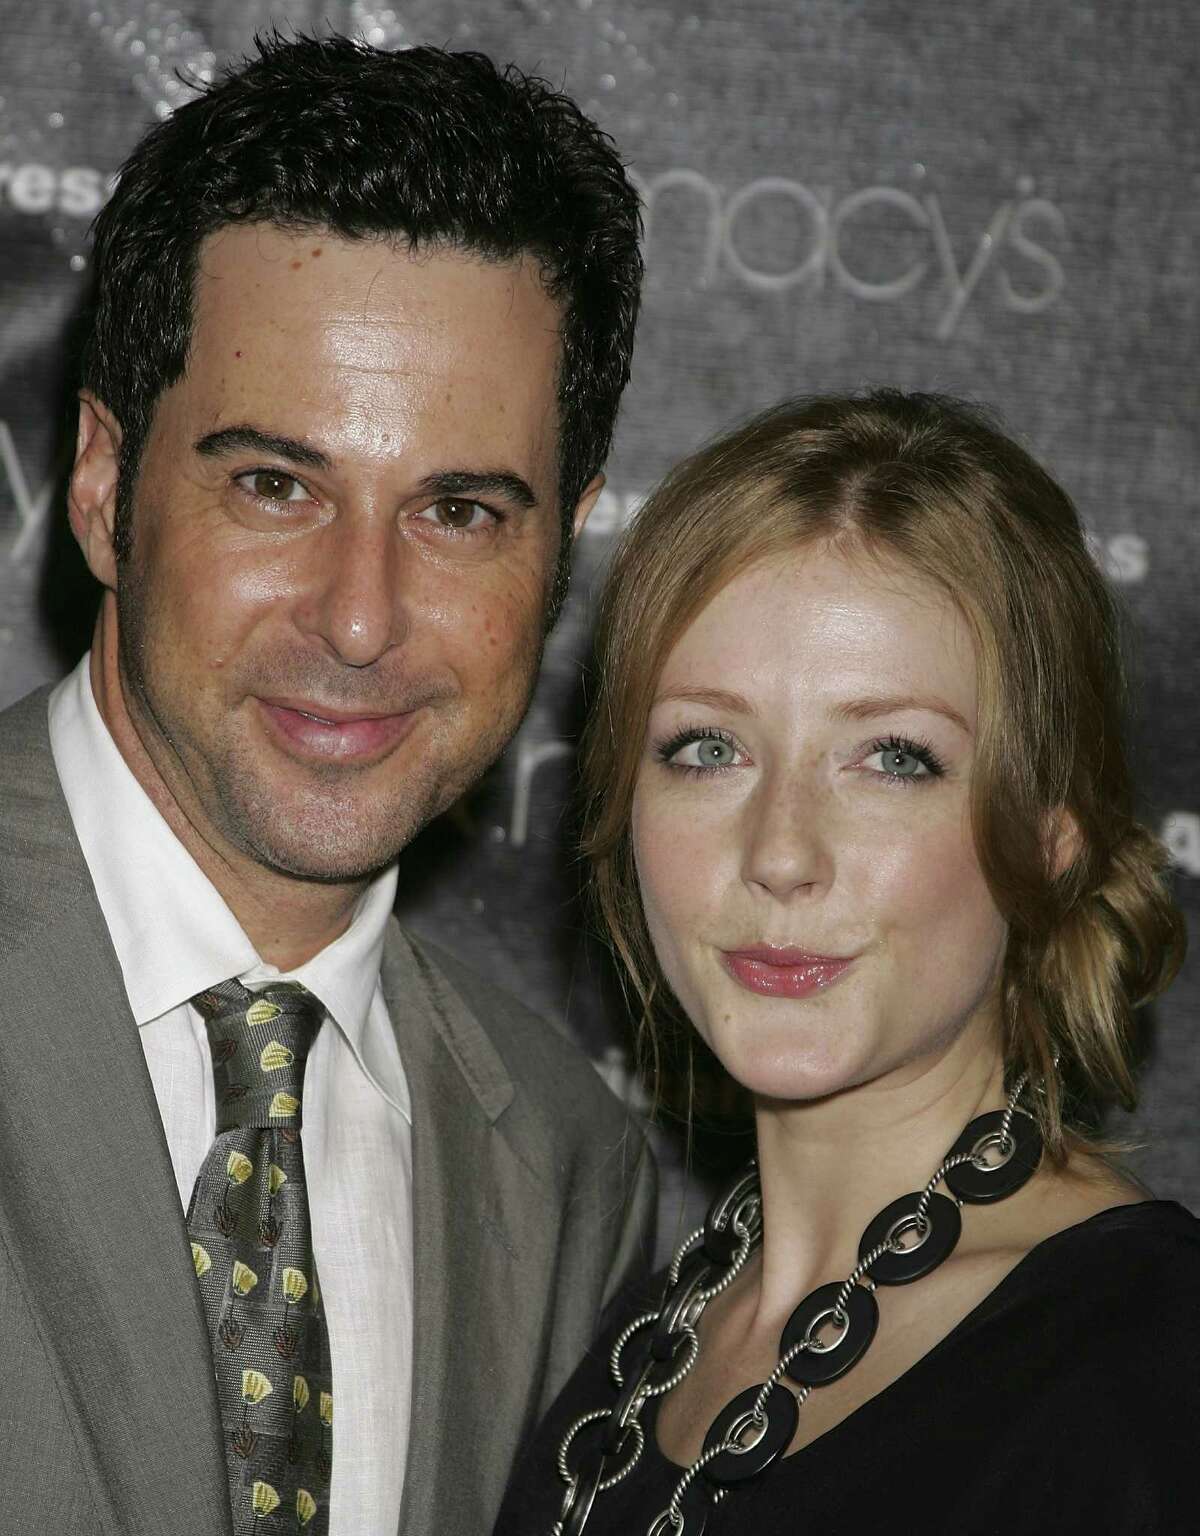 SANTA MONICA, CA - SEPTEMBER 27: Actors Jonathan Silverman (L) and Jennifer Finnigan attend the Macy's Passport auction and fashion show in celebration of it's 25th anniversary at Barker Hangar on September 27, 2007 in Santa Monica, California. (Photo by David Livingston/Getty Images)